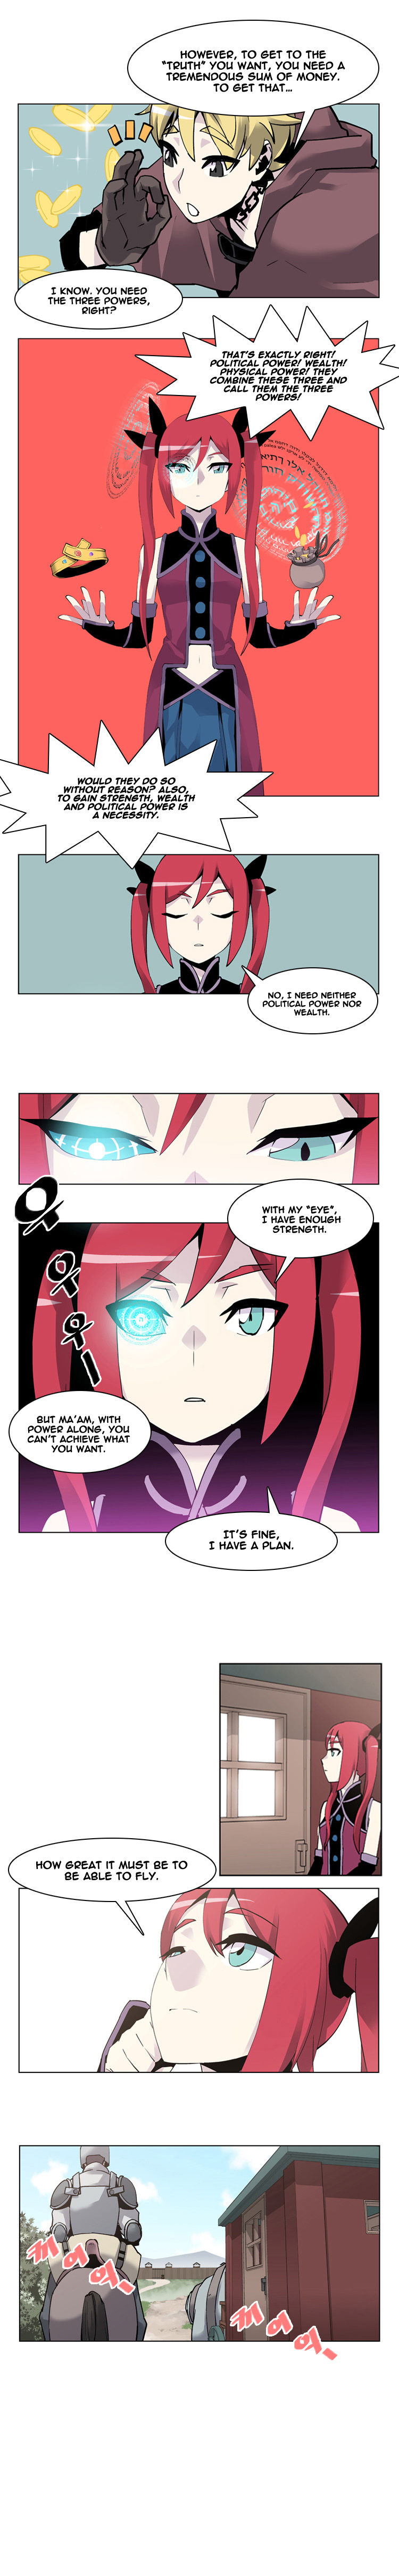 Maze Age Z Chapter 6 Page 2